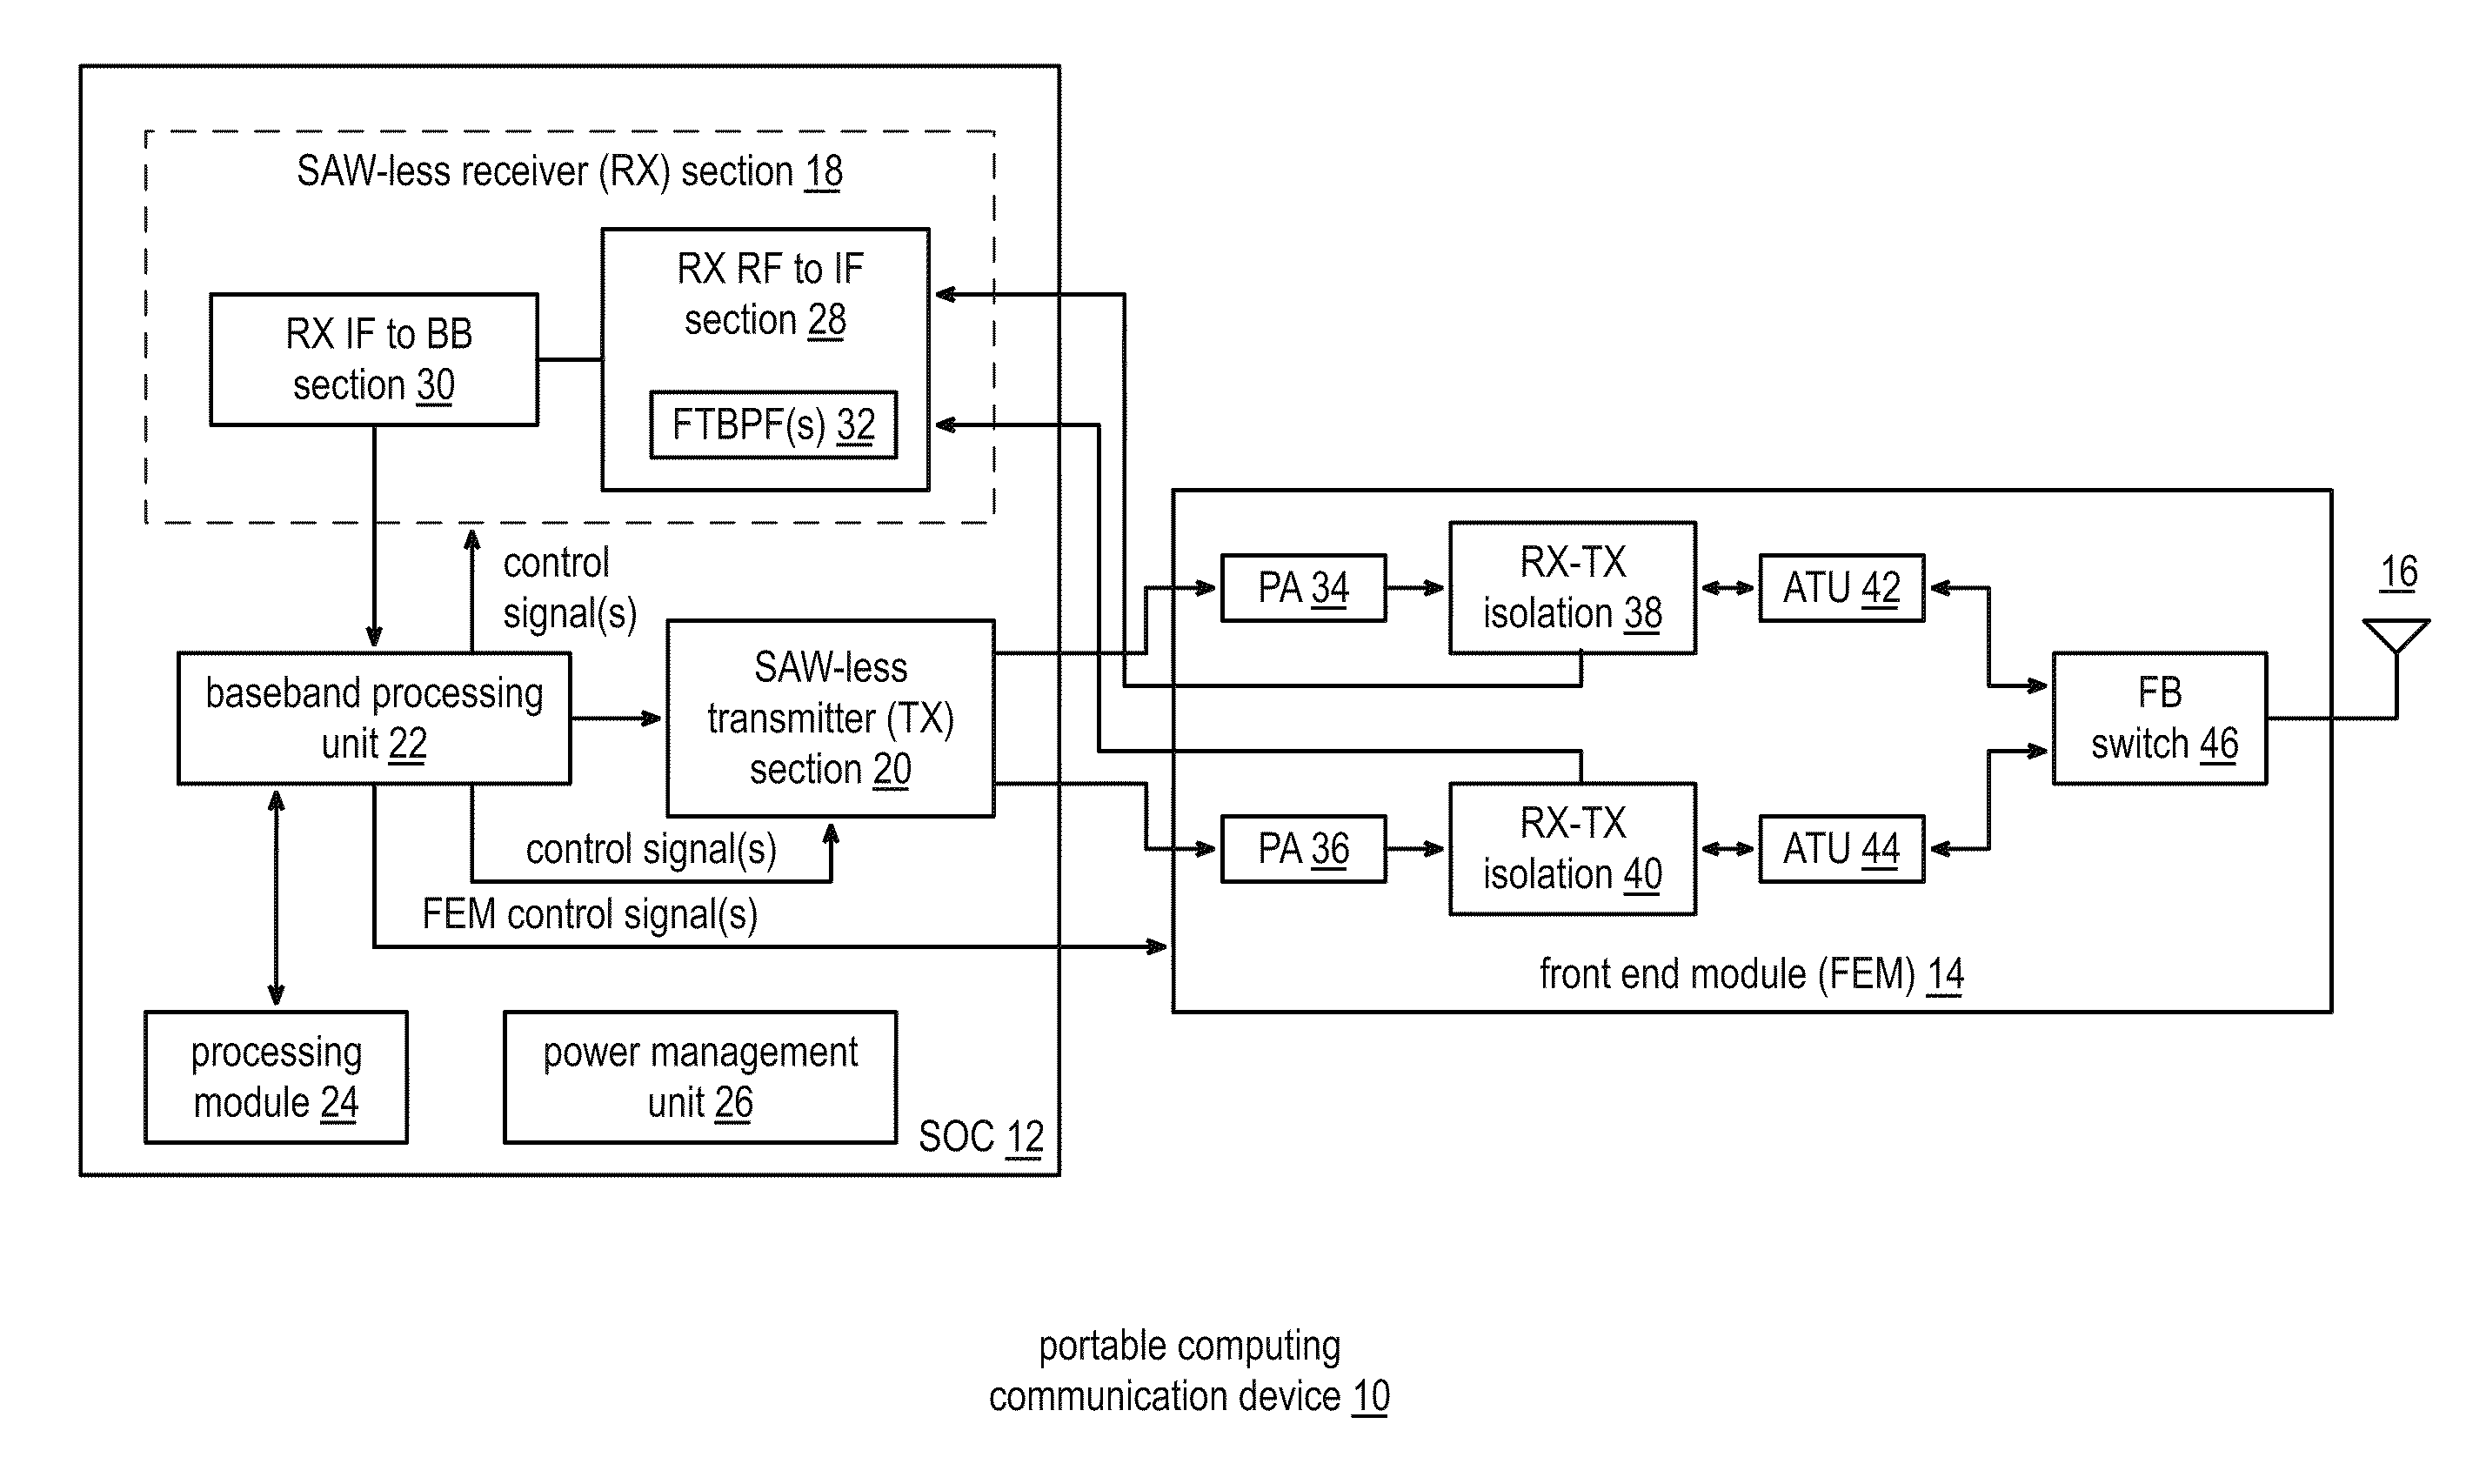 Saw-less receiver including an if frequency translated bpf